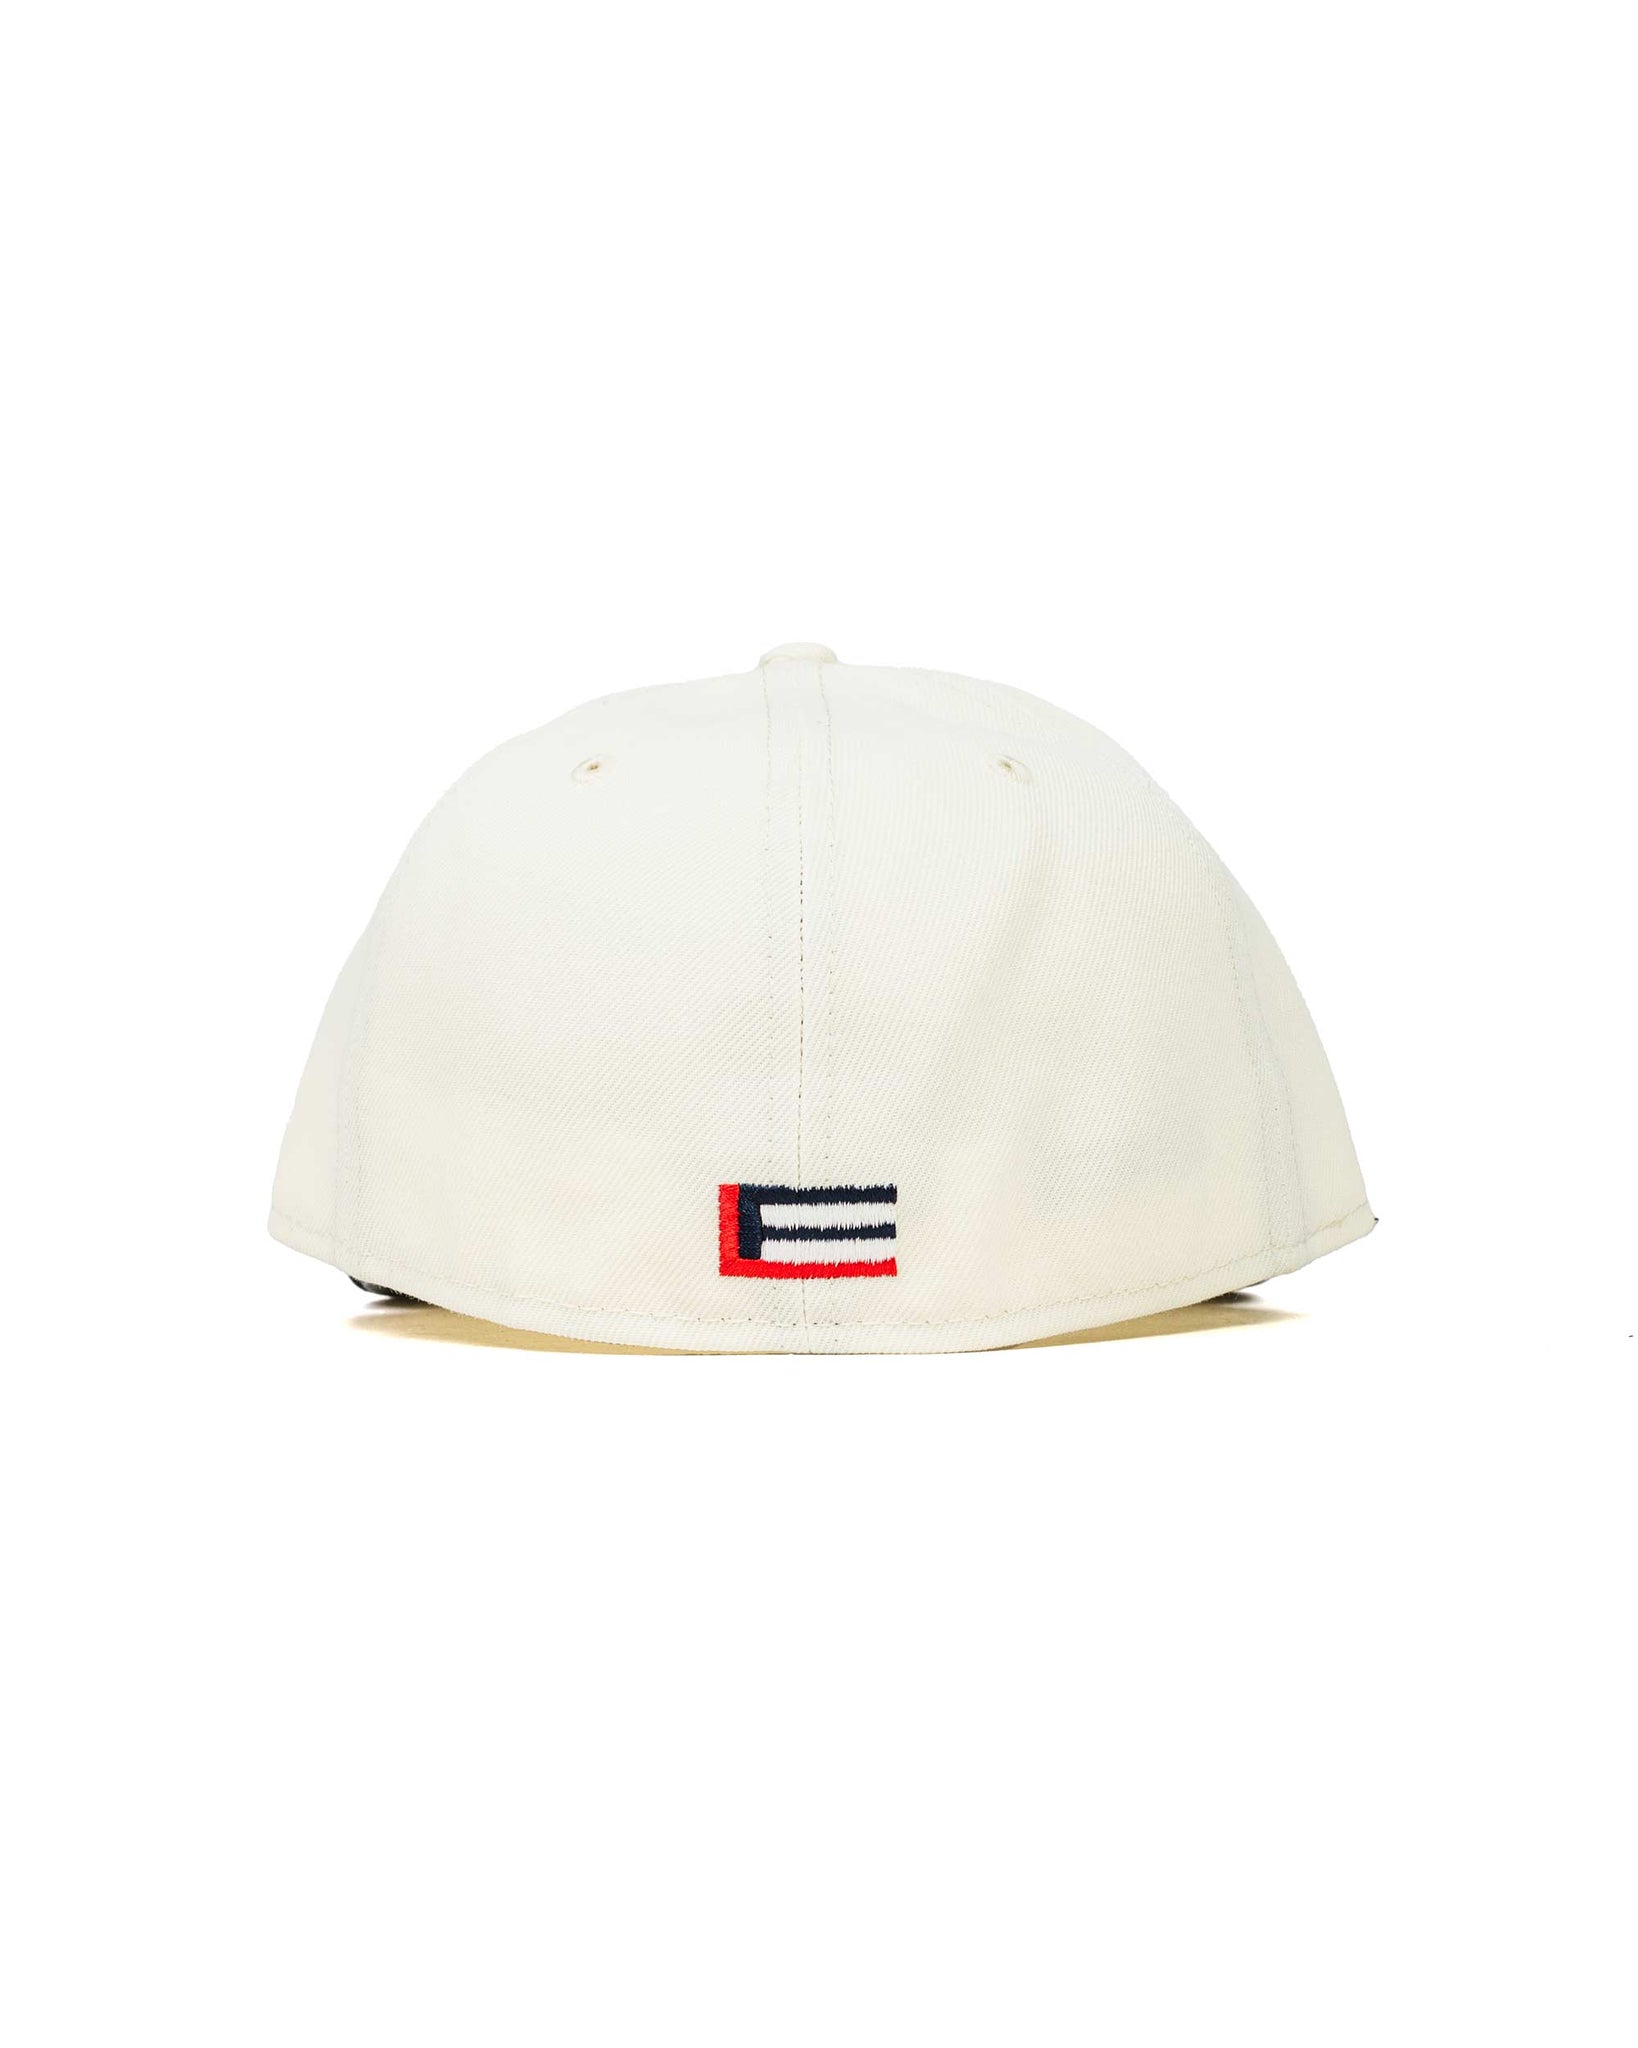 Lost & Found x New Era Low Profile 59FIFTY Cap White/Navy Back